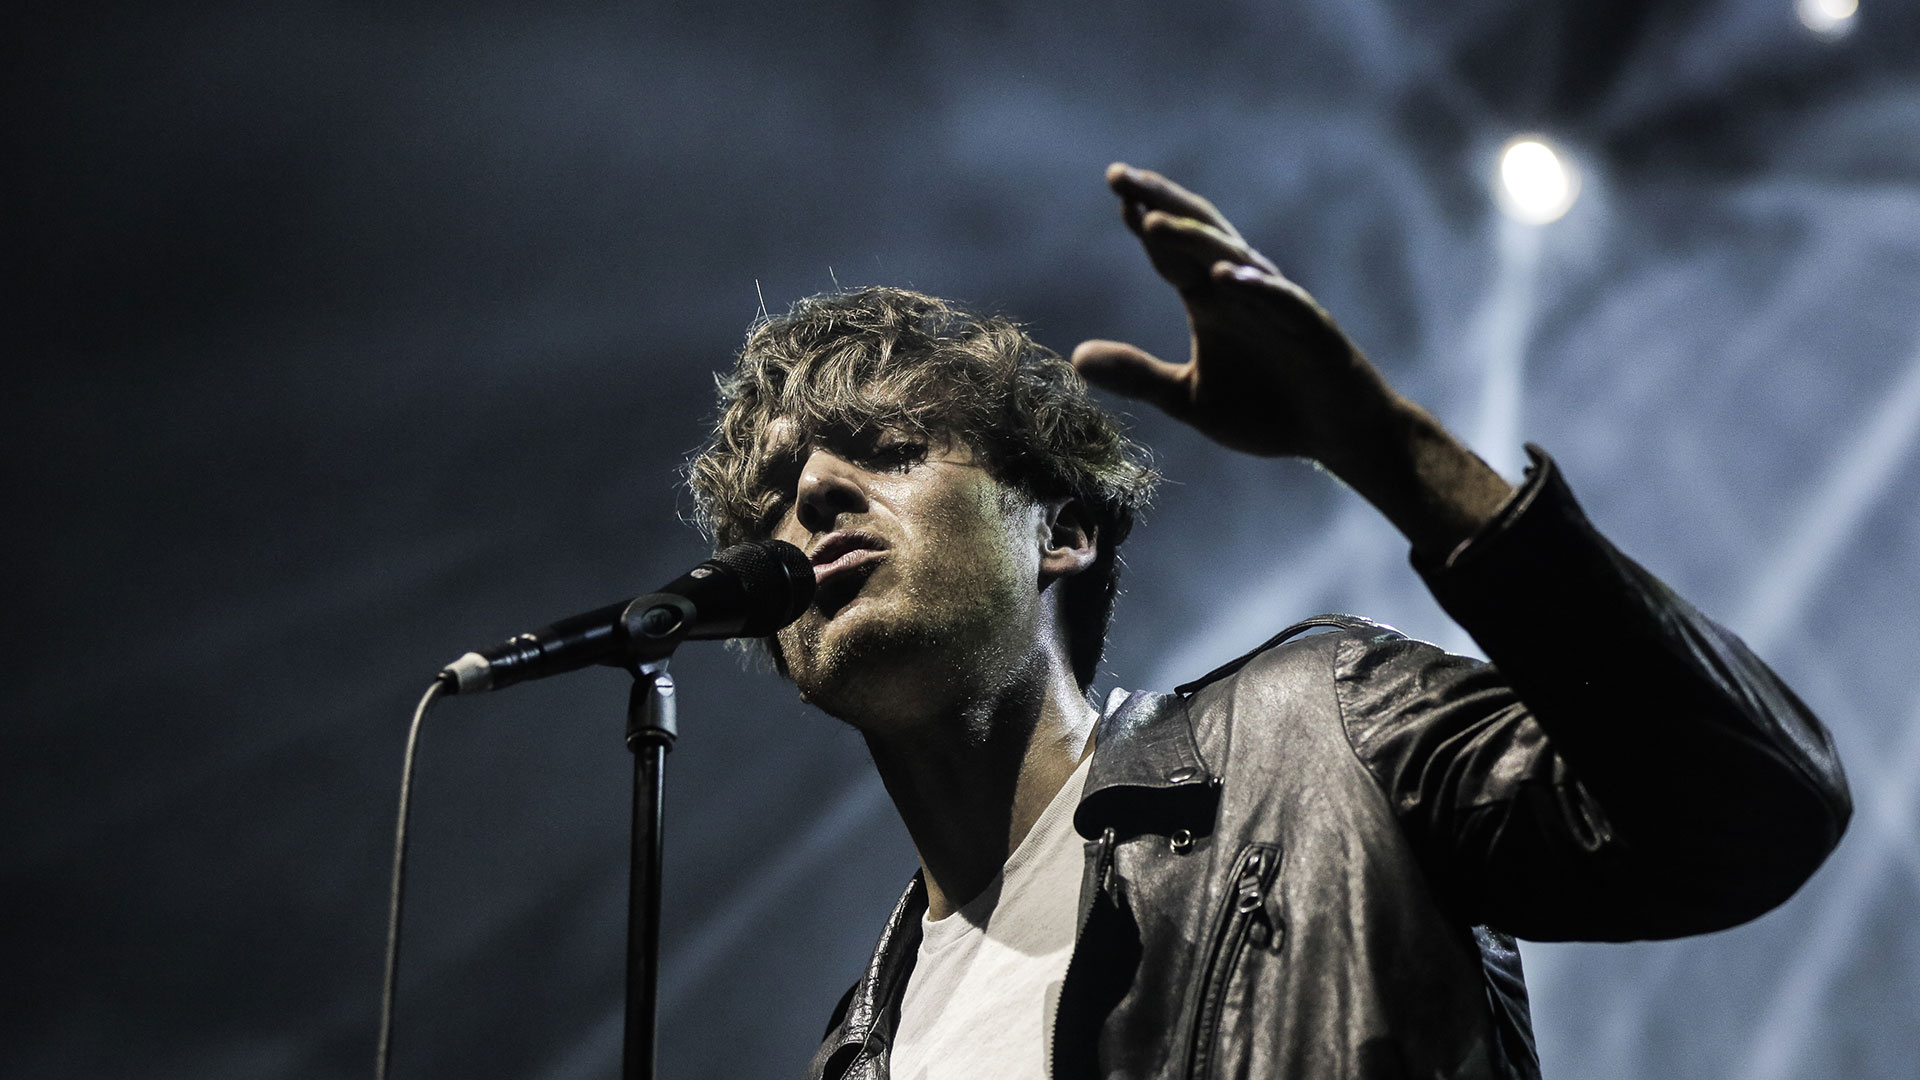 Paolo Nutini, New music ideas, Paisley connection, Musical inspiration, 1920x1080 Full HD Desktop